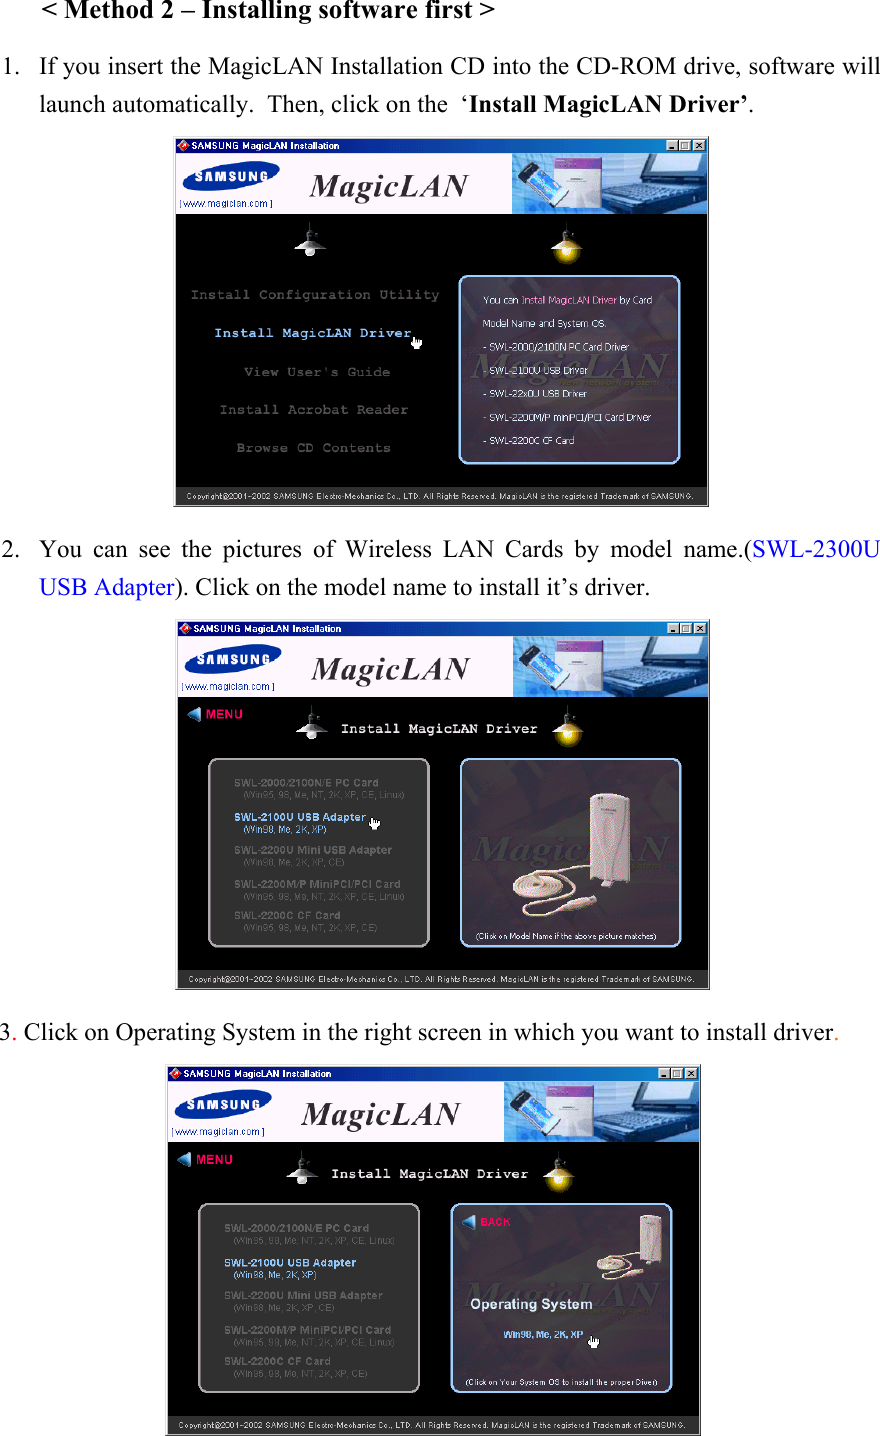  &lt; Method 2 – Installing software first &gt; 1. If you insert the MagicLAN Installation CD into the CD-ROM drive, software will launch automatically.  Then, click on the  ‘Install MagicLAN Driver’.  2. You can see the pictures of Wireless LAN Cards by model name.(SWL-2300U USB Adapter). Click on the model name to install it’s driver.          3. Click on Operating System in the right screen in which you want to install driver.       